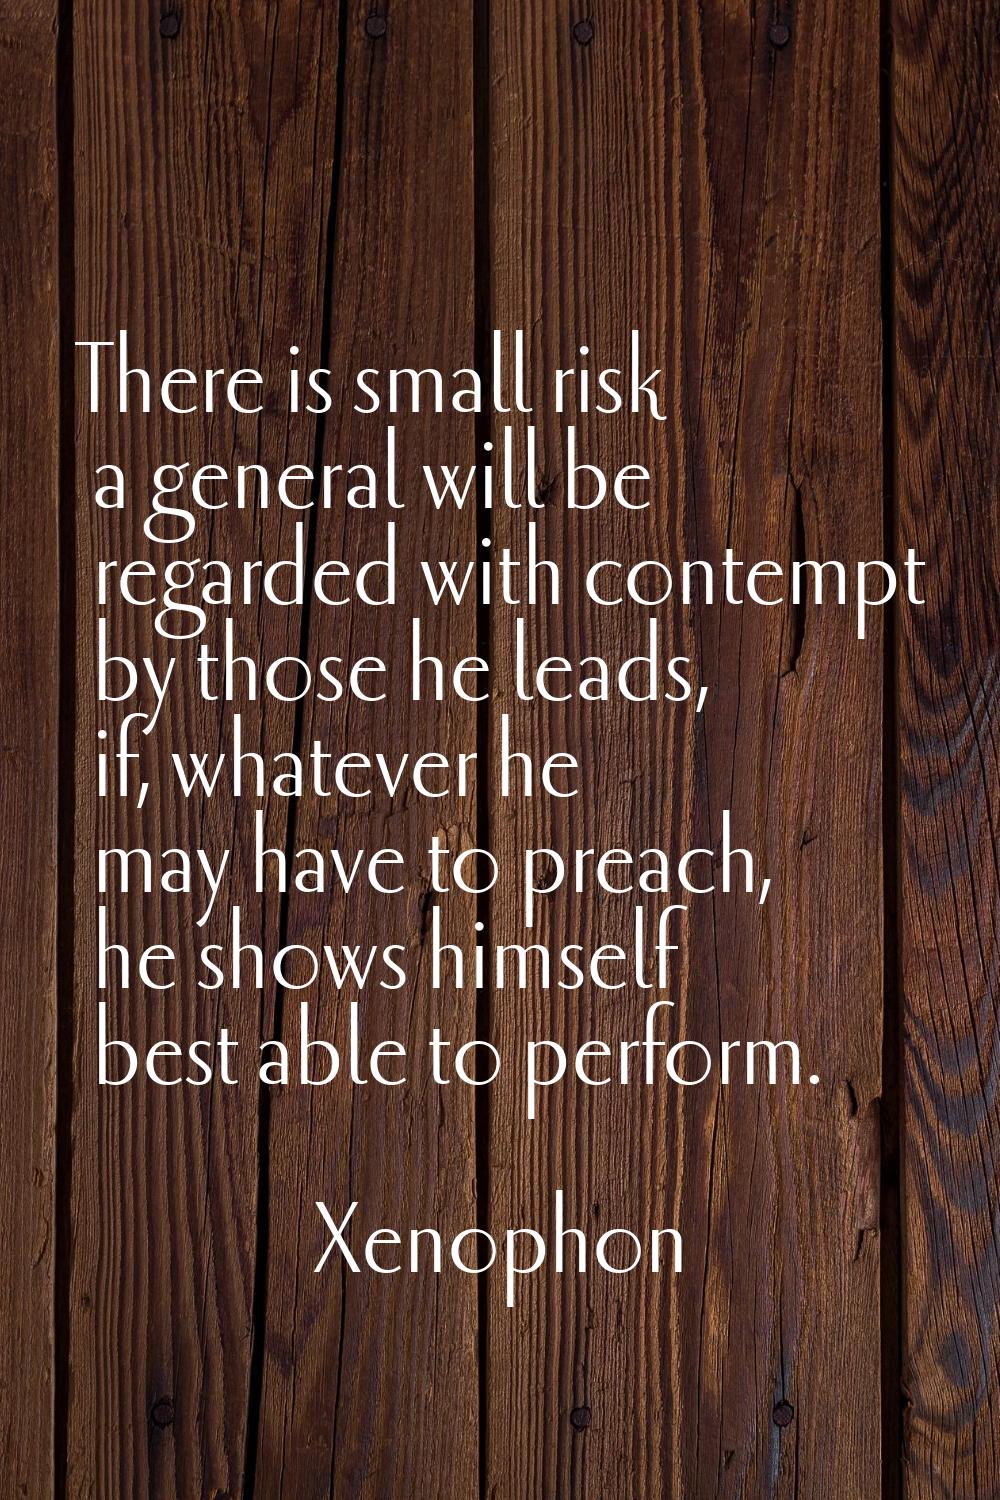 There is small risk a general will be regarded with contempt by those he leads, if, whatever he may